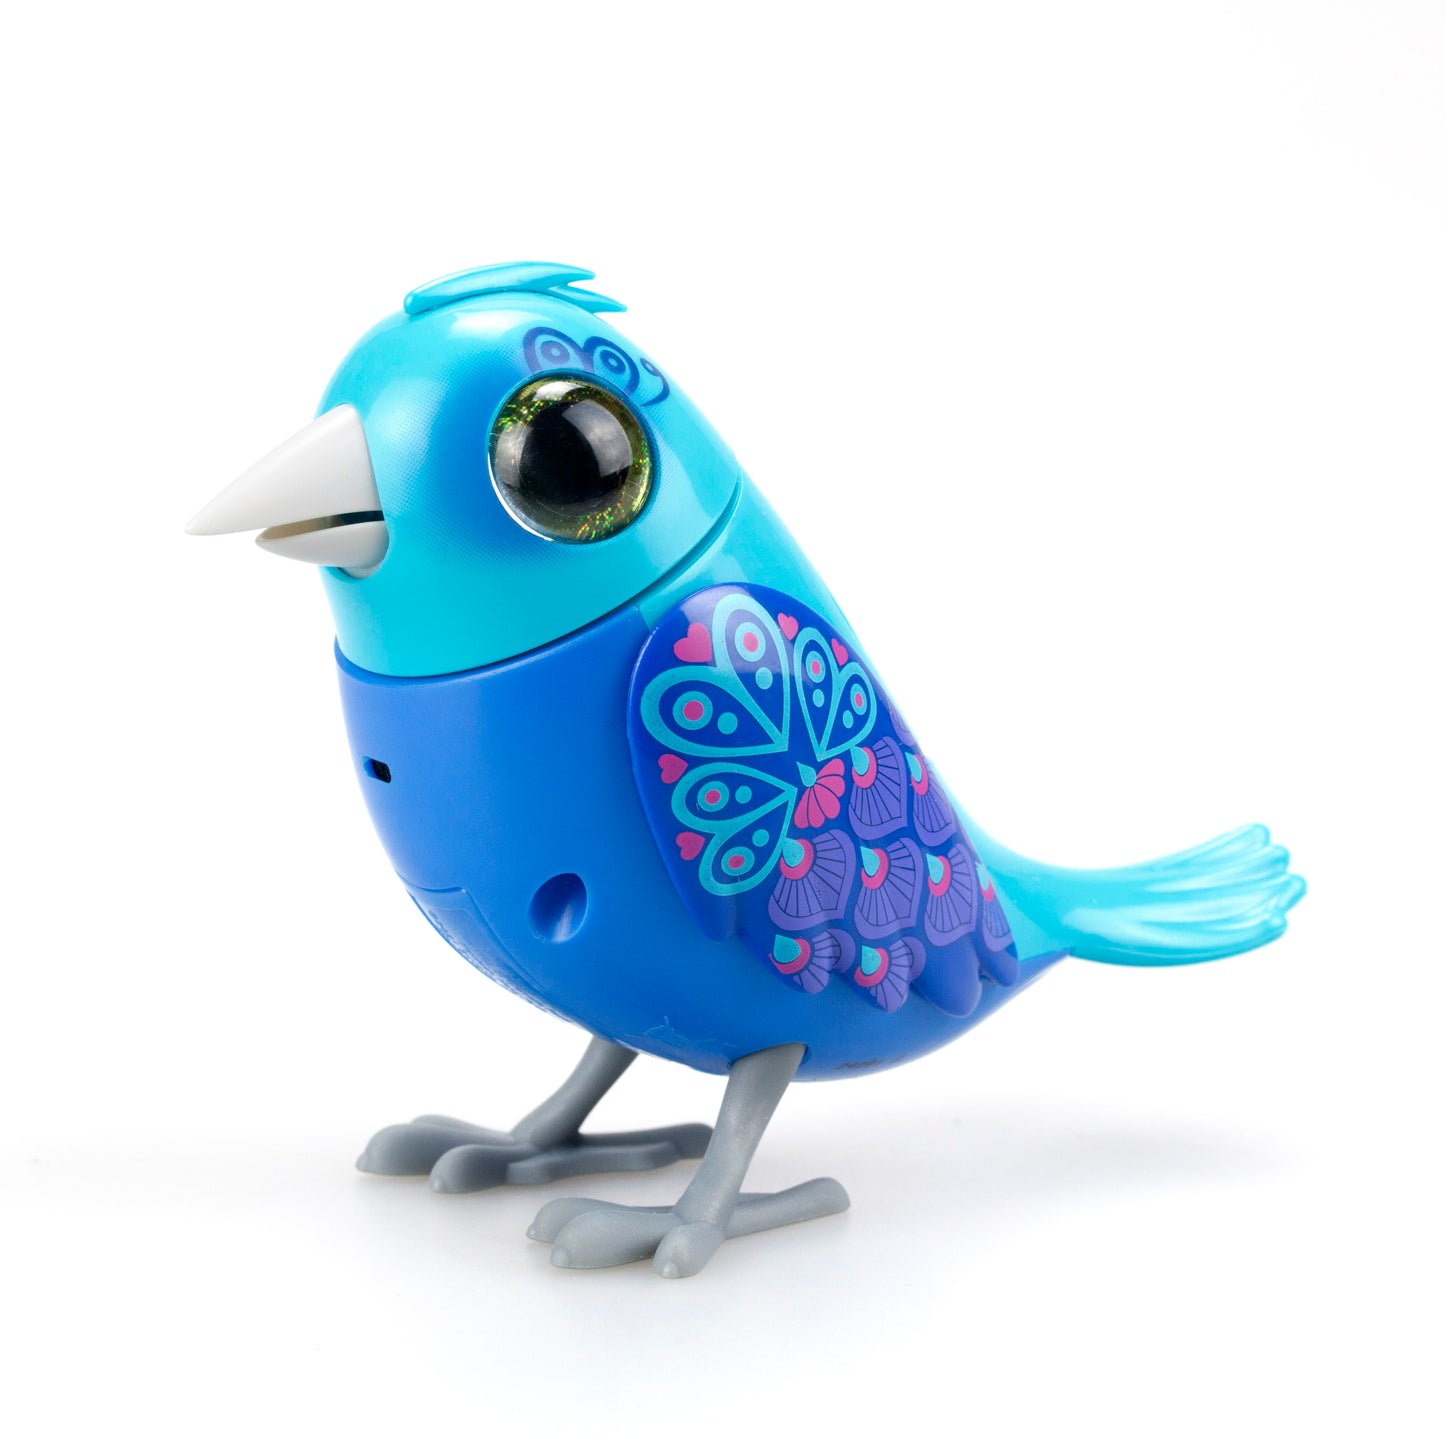 DIGIBIRDS II Interactive Hummingbird Toy - Lively Blue